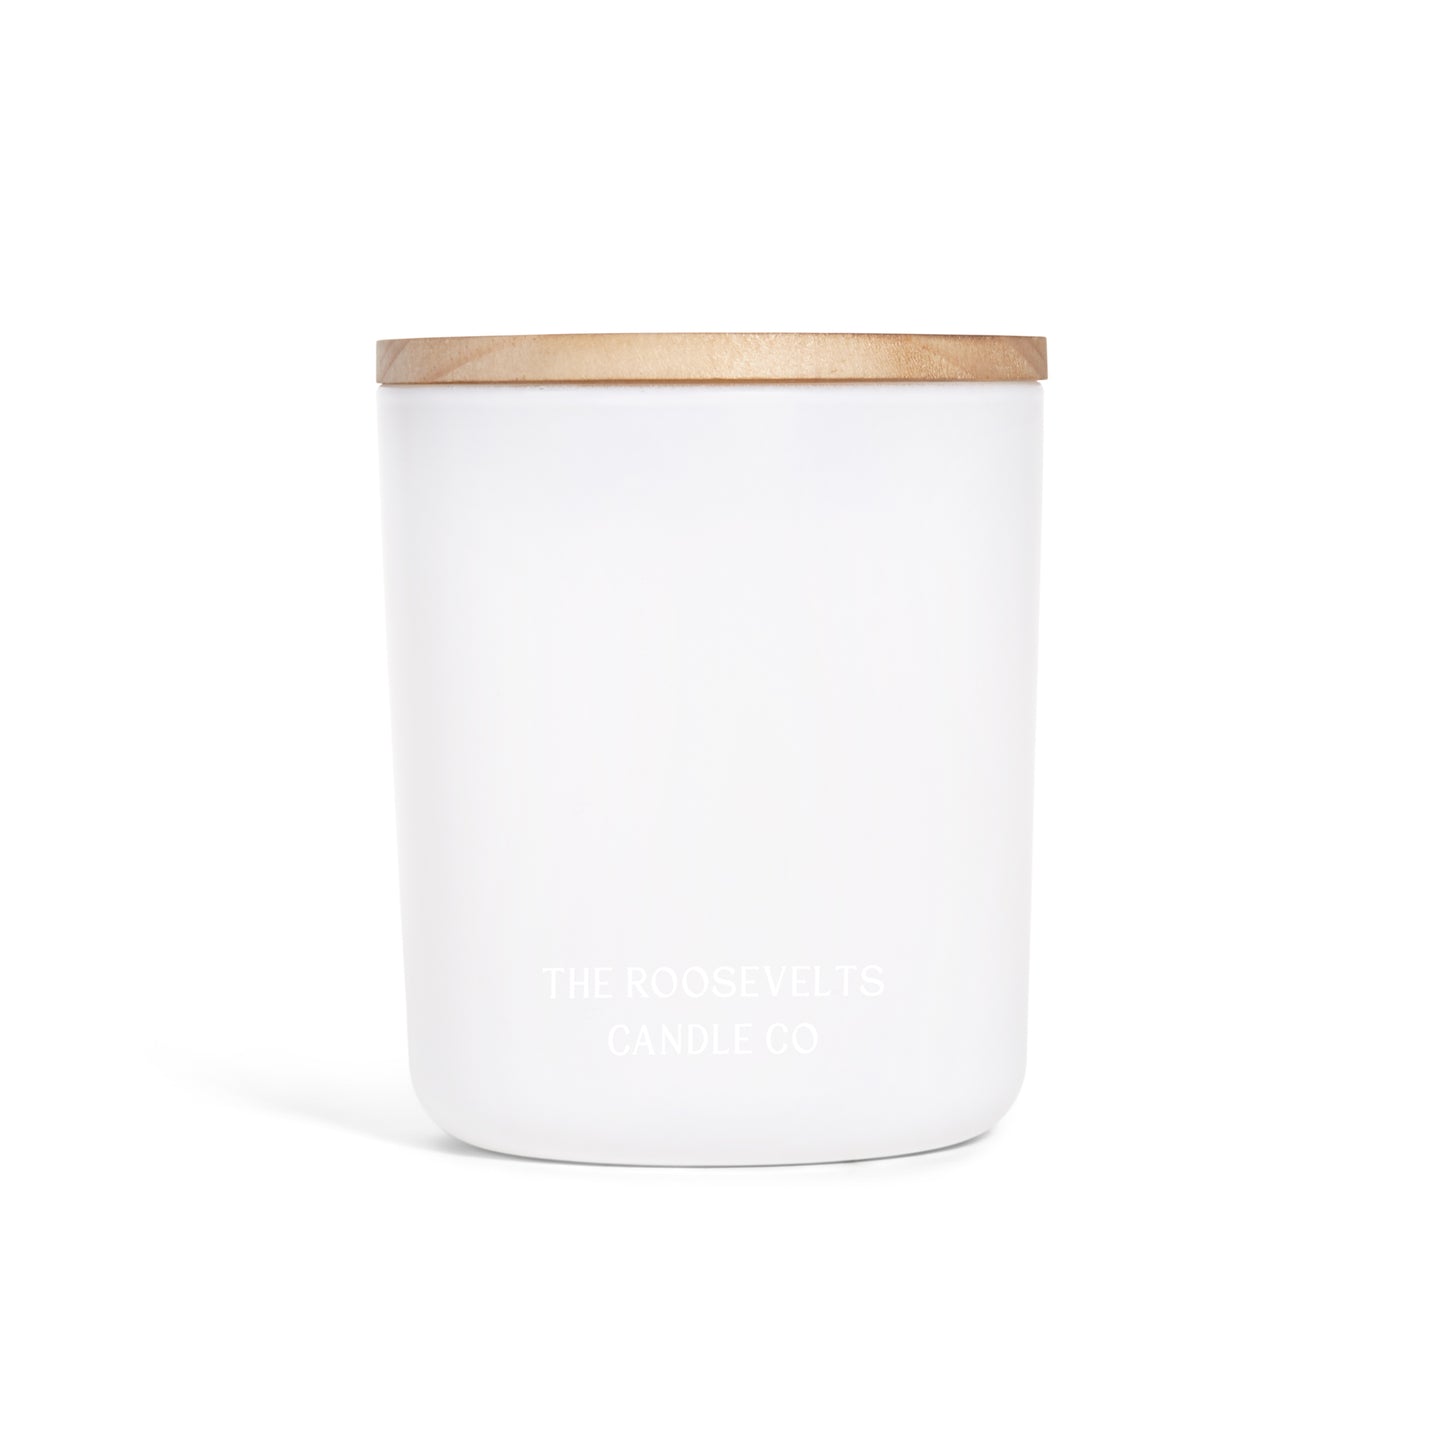 Yellowstone Candle - The Roosevelts Candle Co.